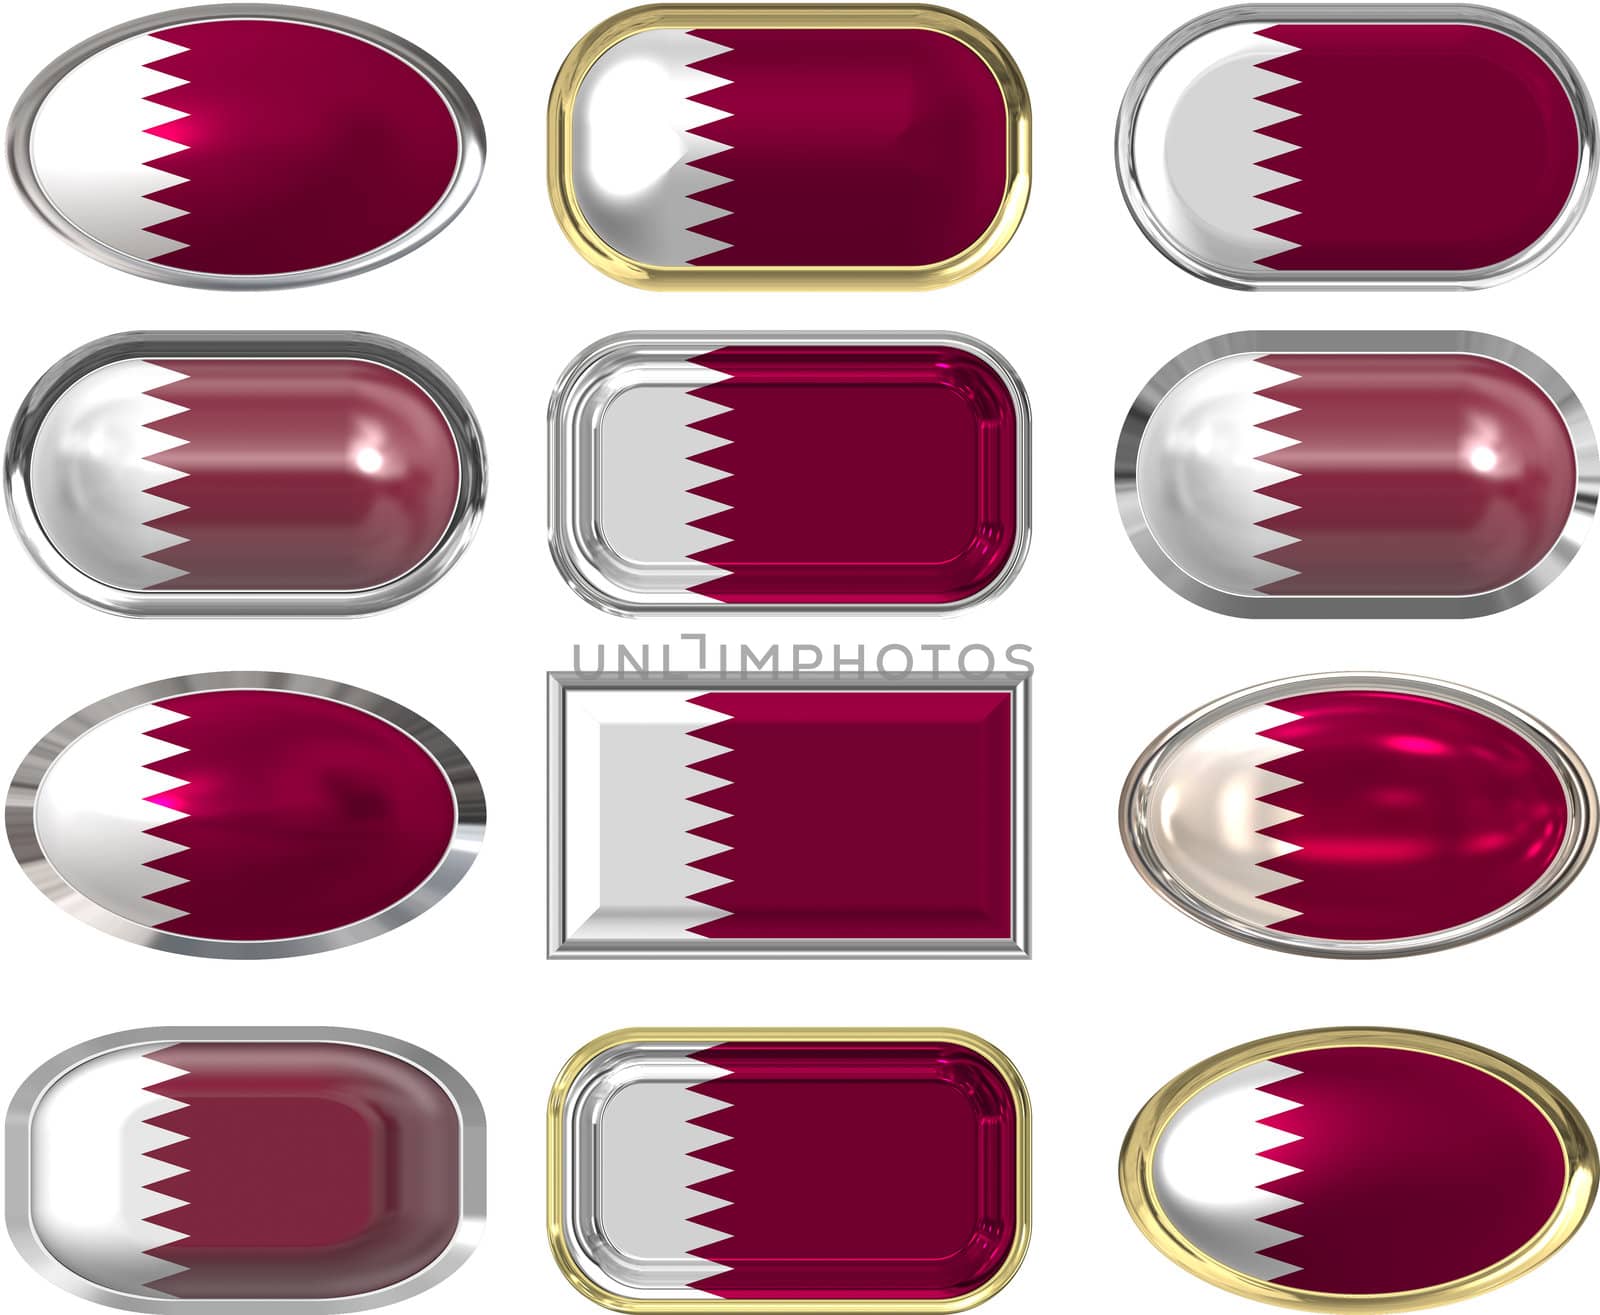 12 buttons of the Flag of Qatar by clearviewstock